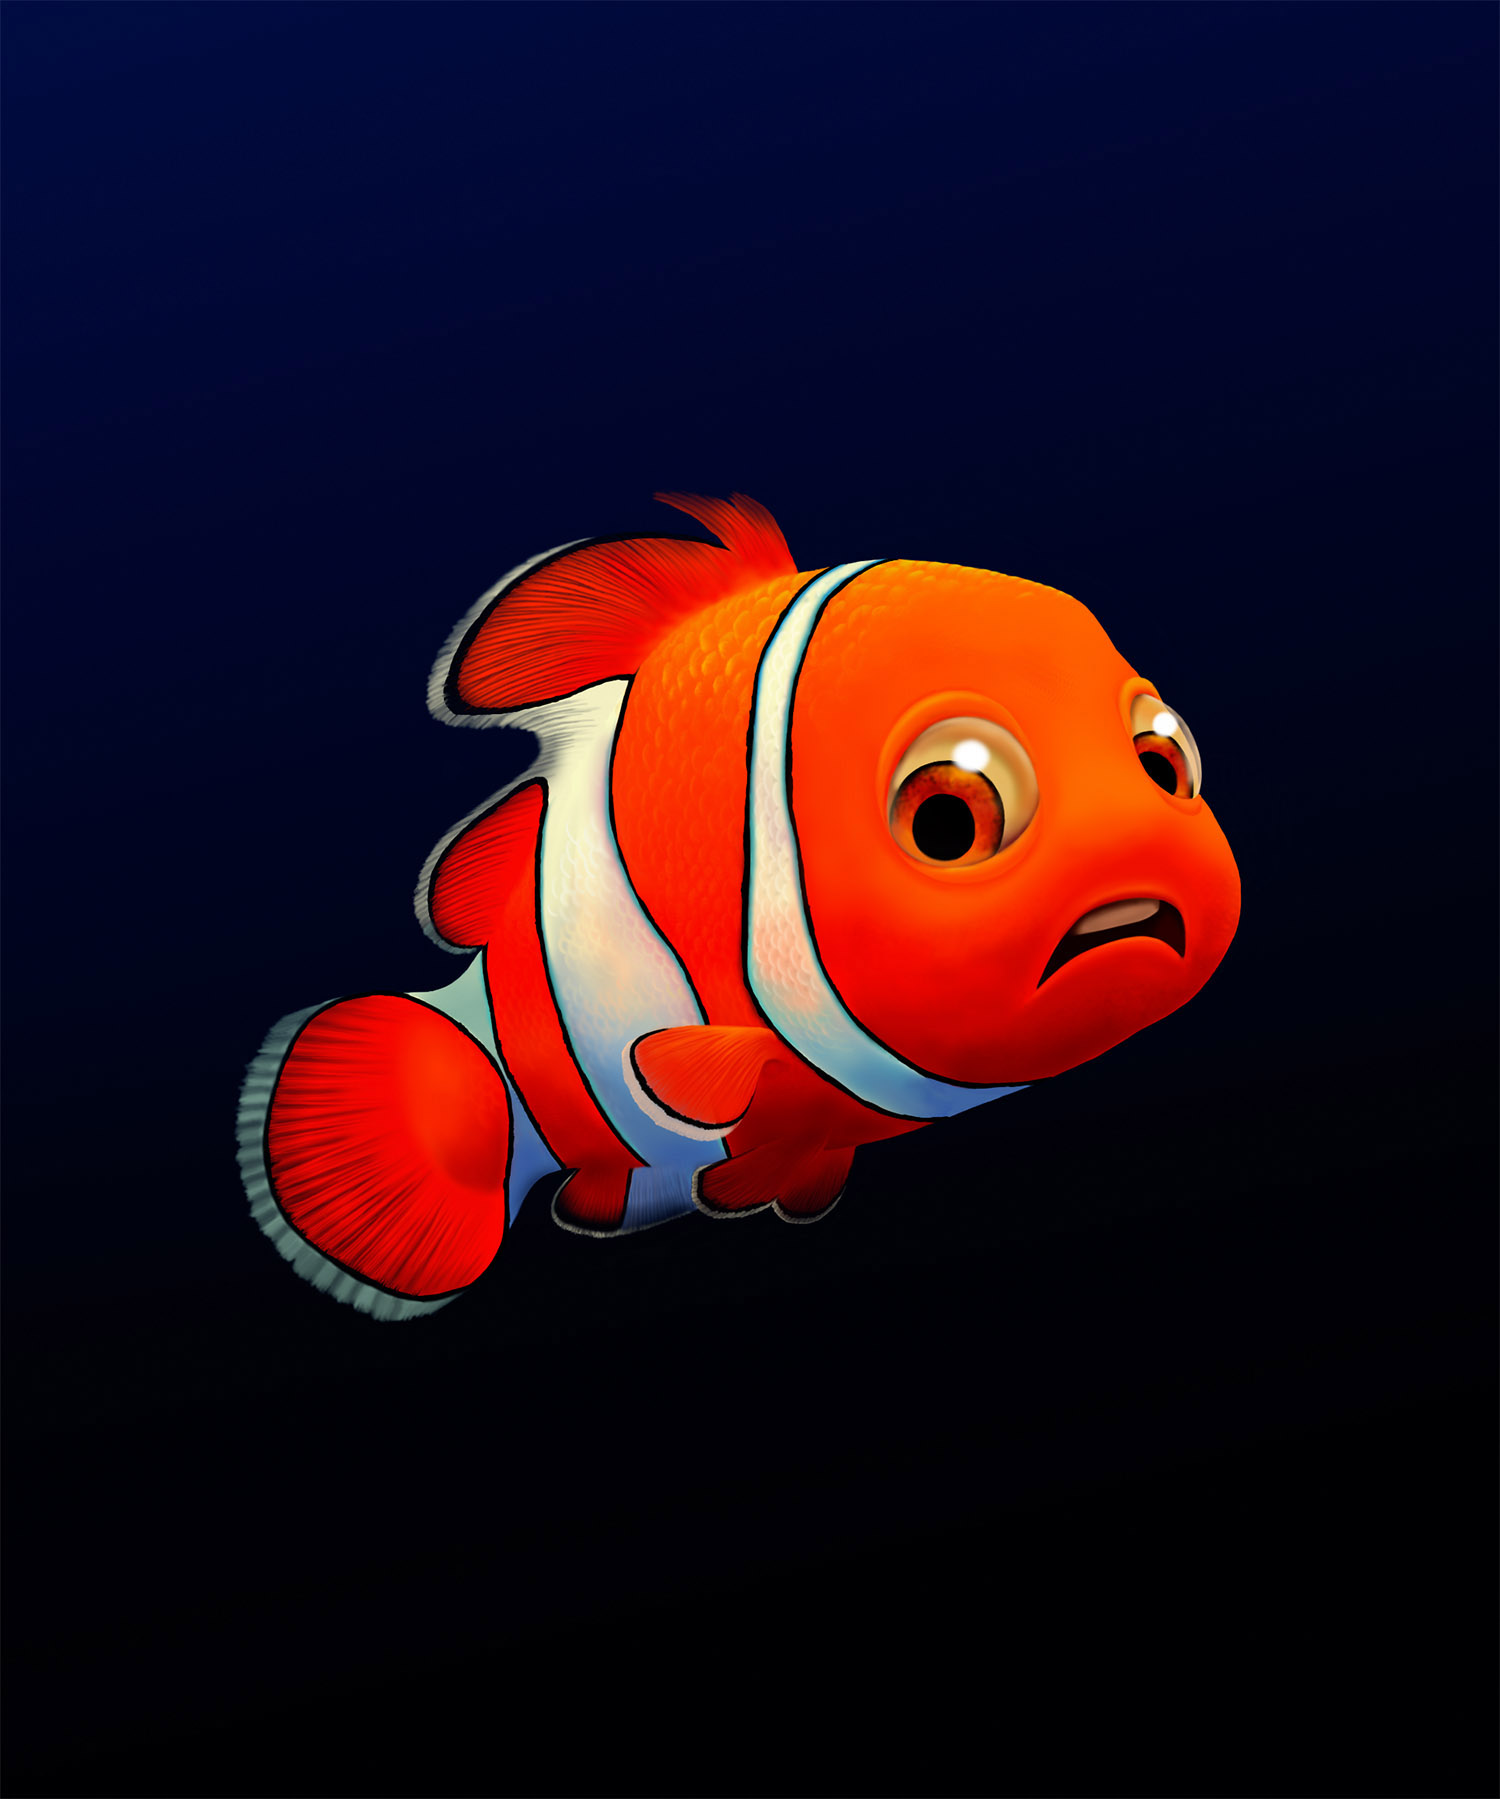 21-facts-about-nemo-finding-nemo